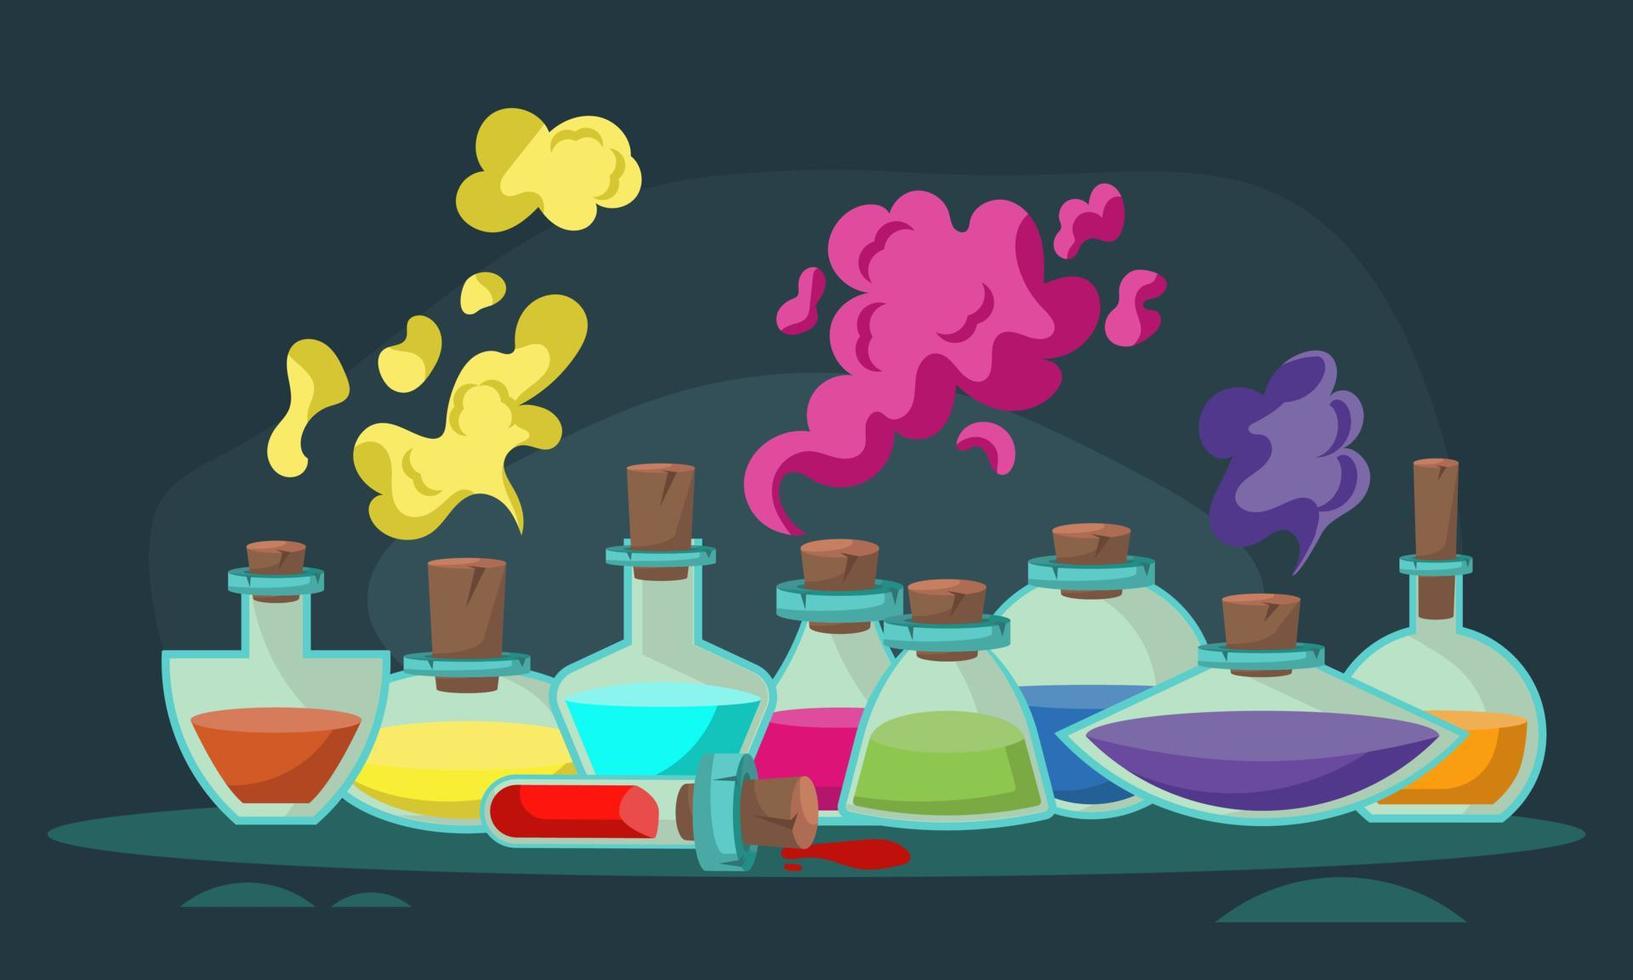 Game icons of bottles with poison or elixir. Cartoon container for health or energy. Collection magical liquid in glass bottles with corks. Vector illustration of magic items or wizard toxic object.